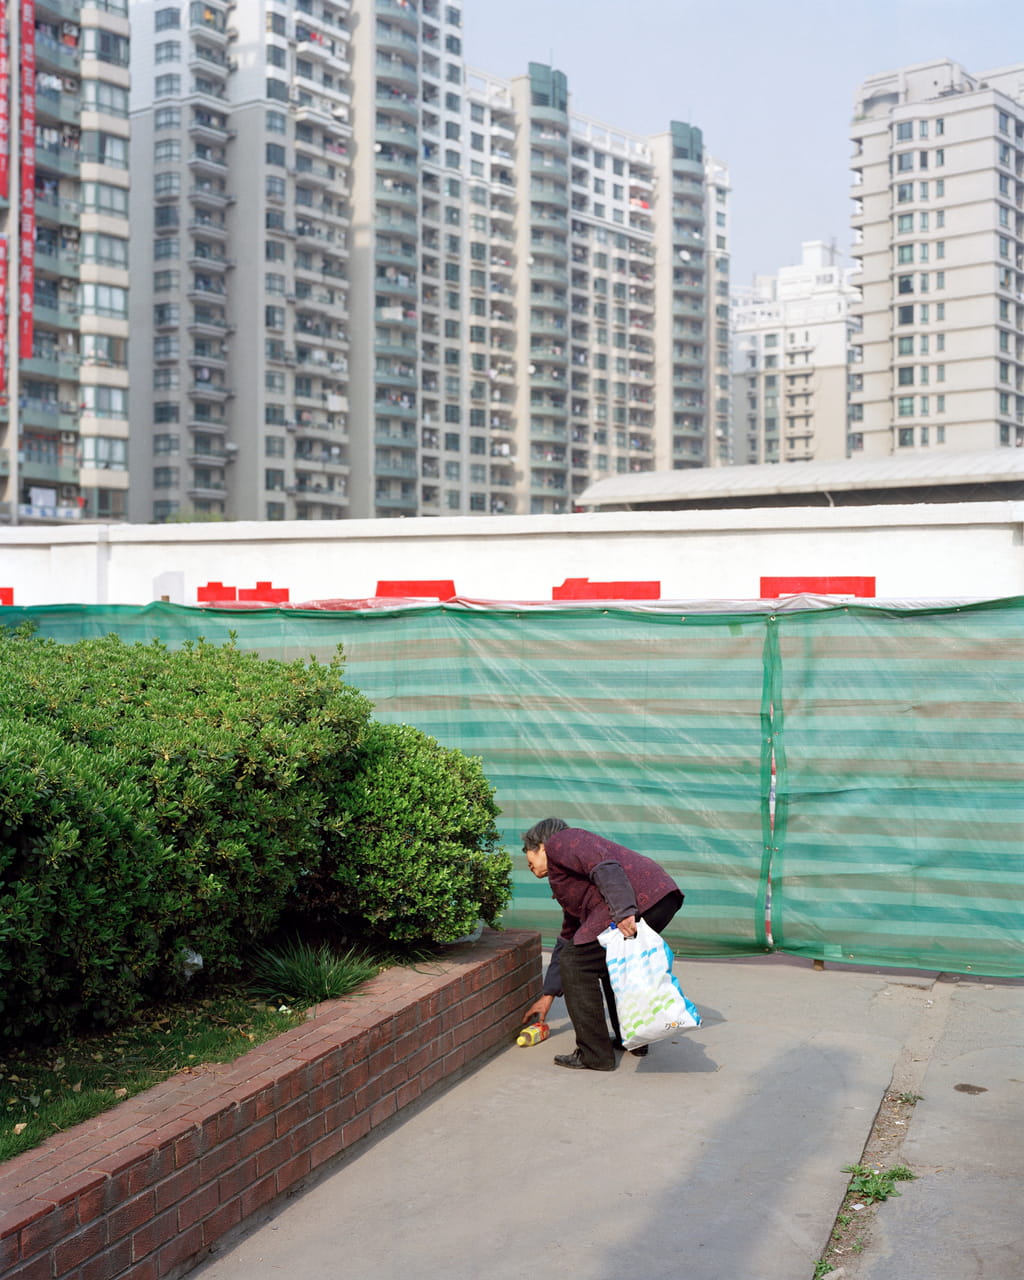 Photograph of a person picking up something that looks like a bottle from the road. In the background there are high rise buidlings